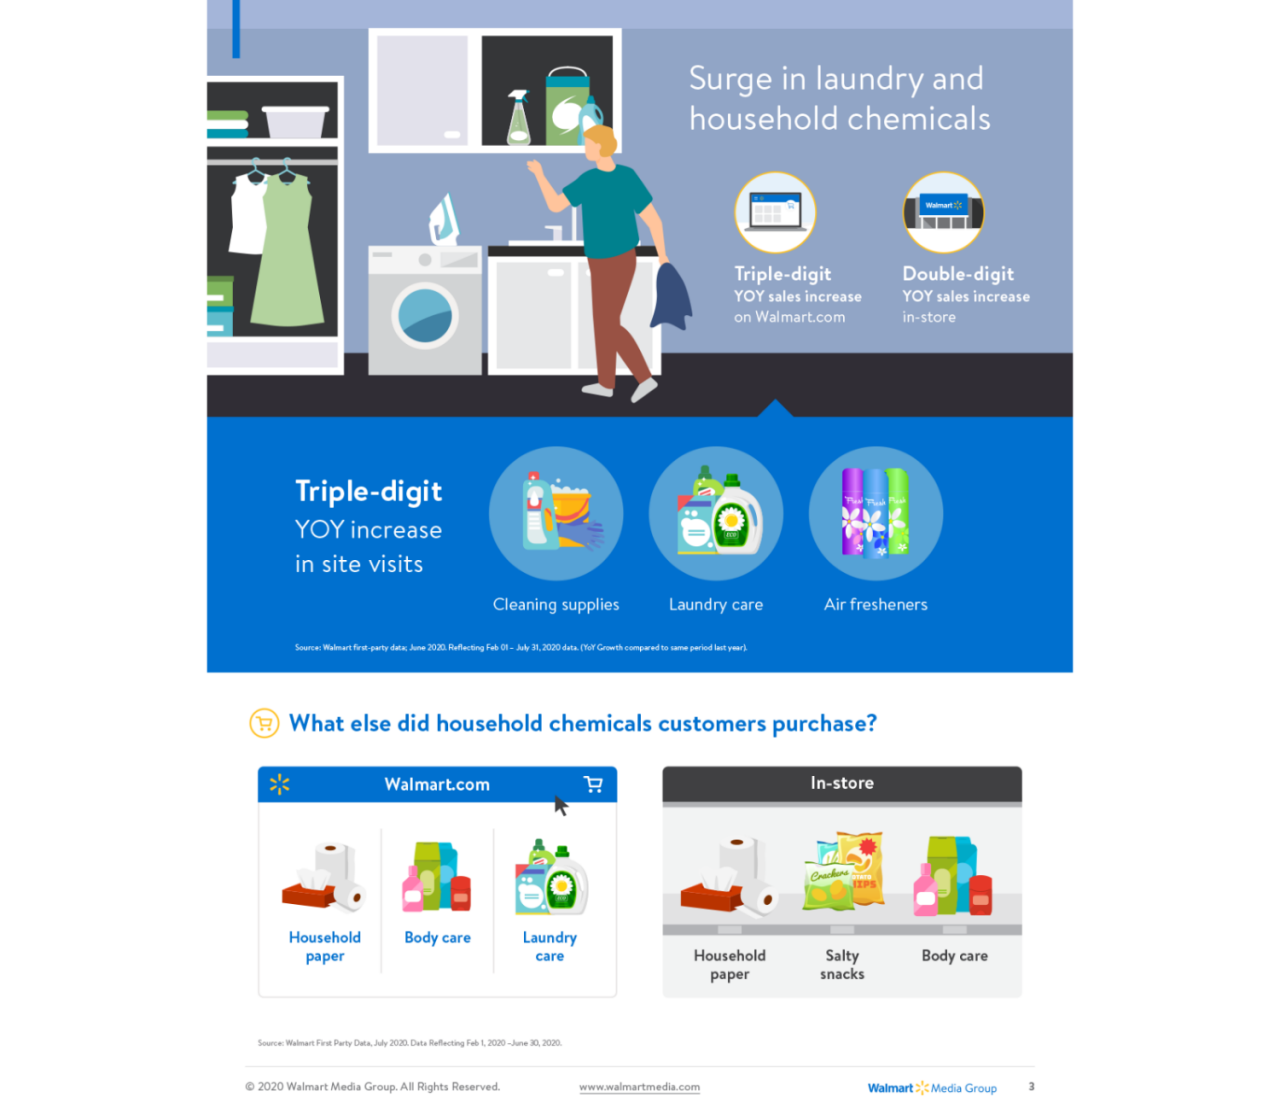 walmart-customer-insights-household-essentials-personal-care-3